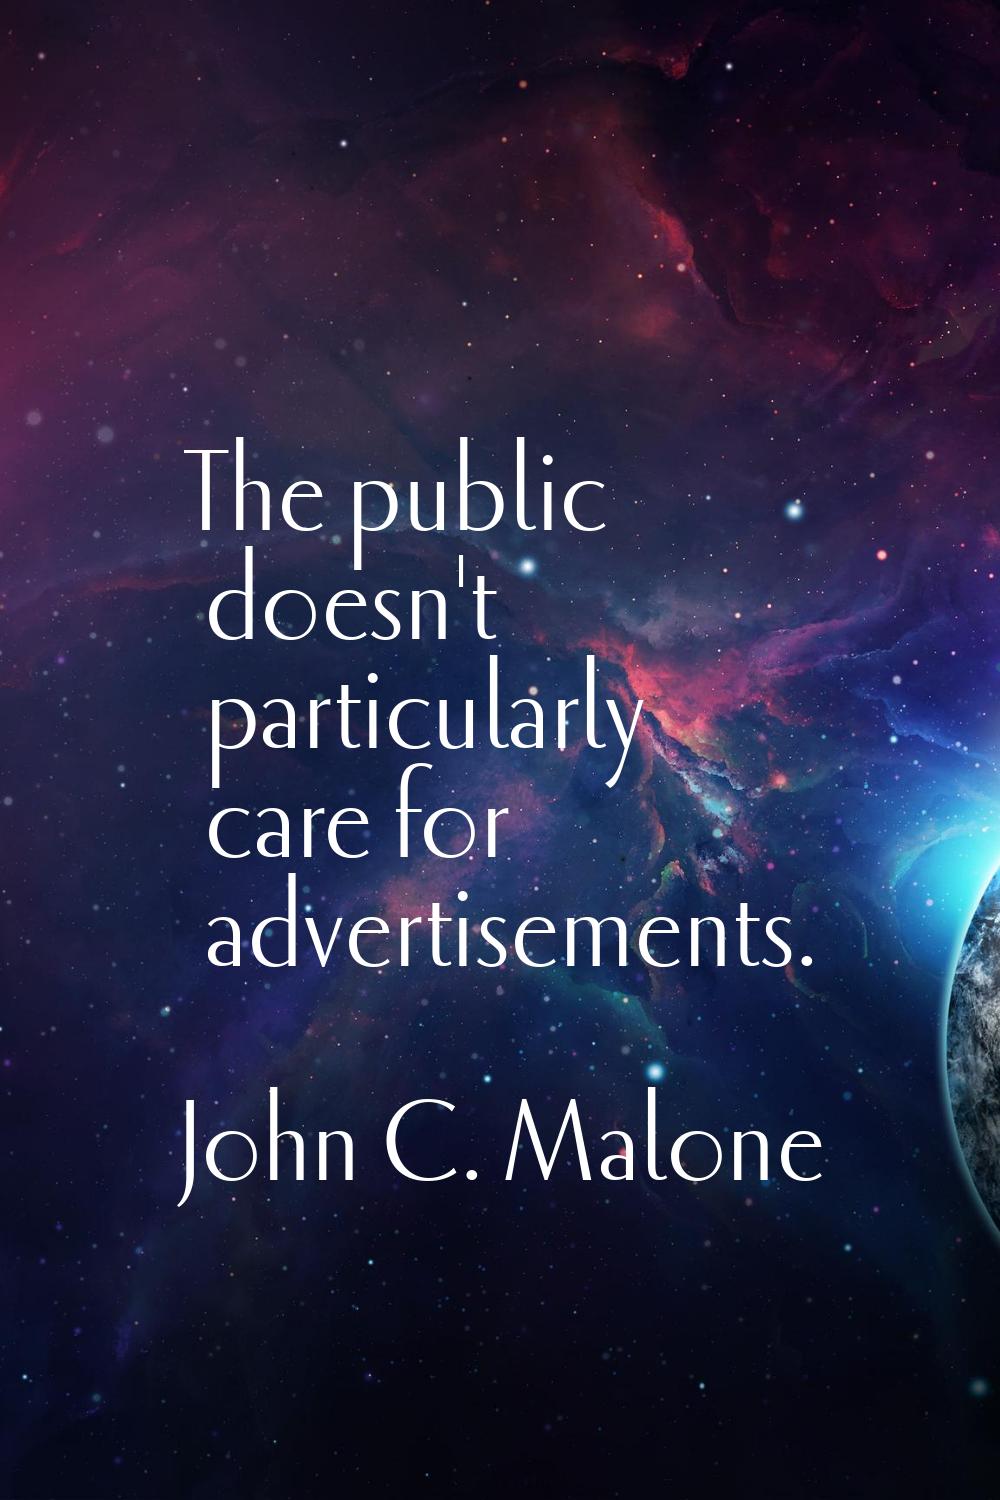 The public doesn't particularly care for advertisements.